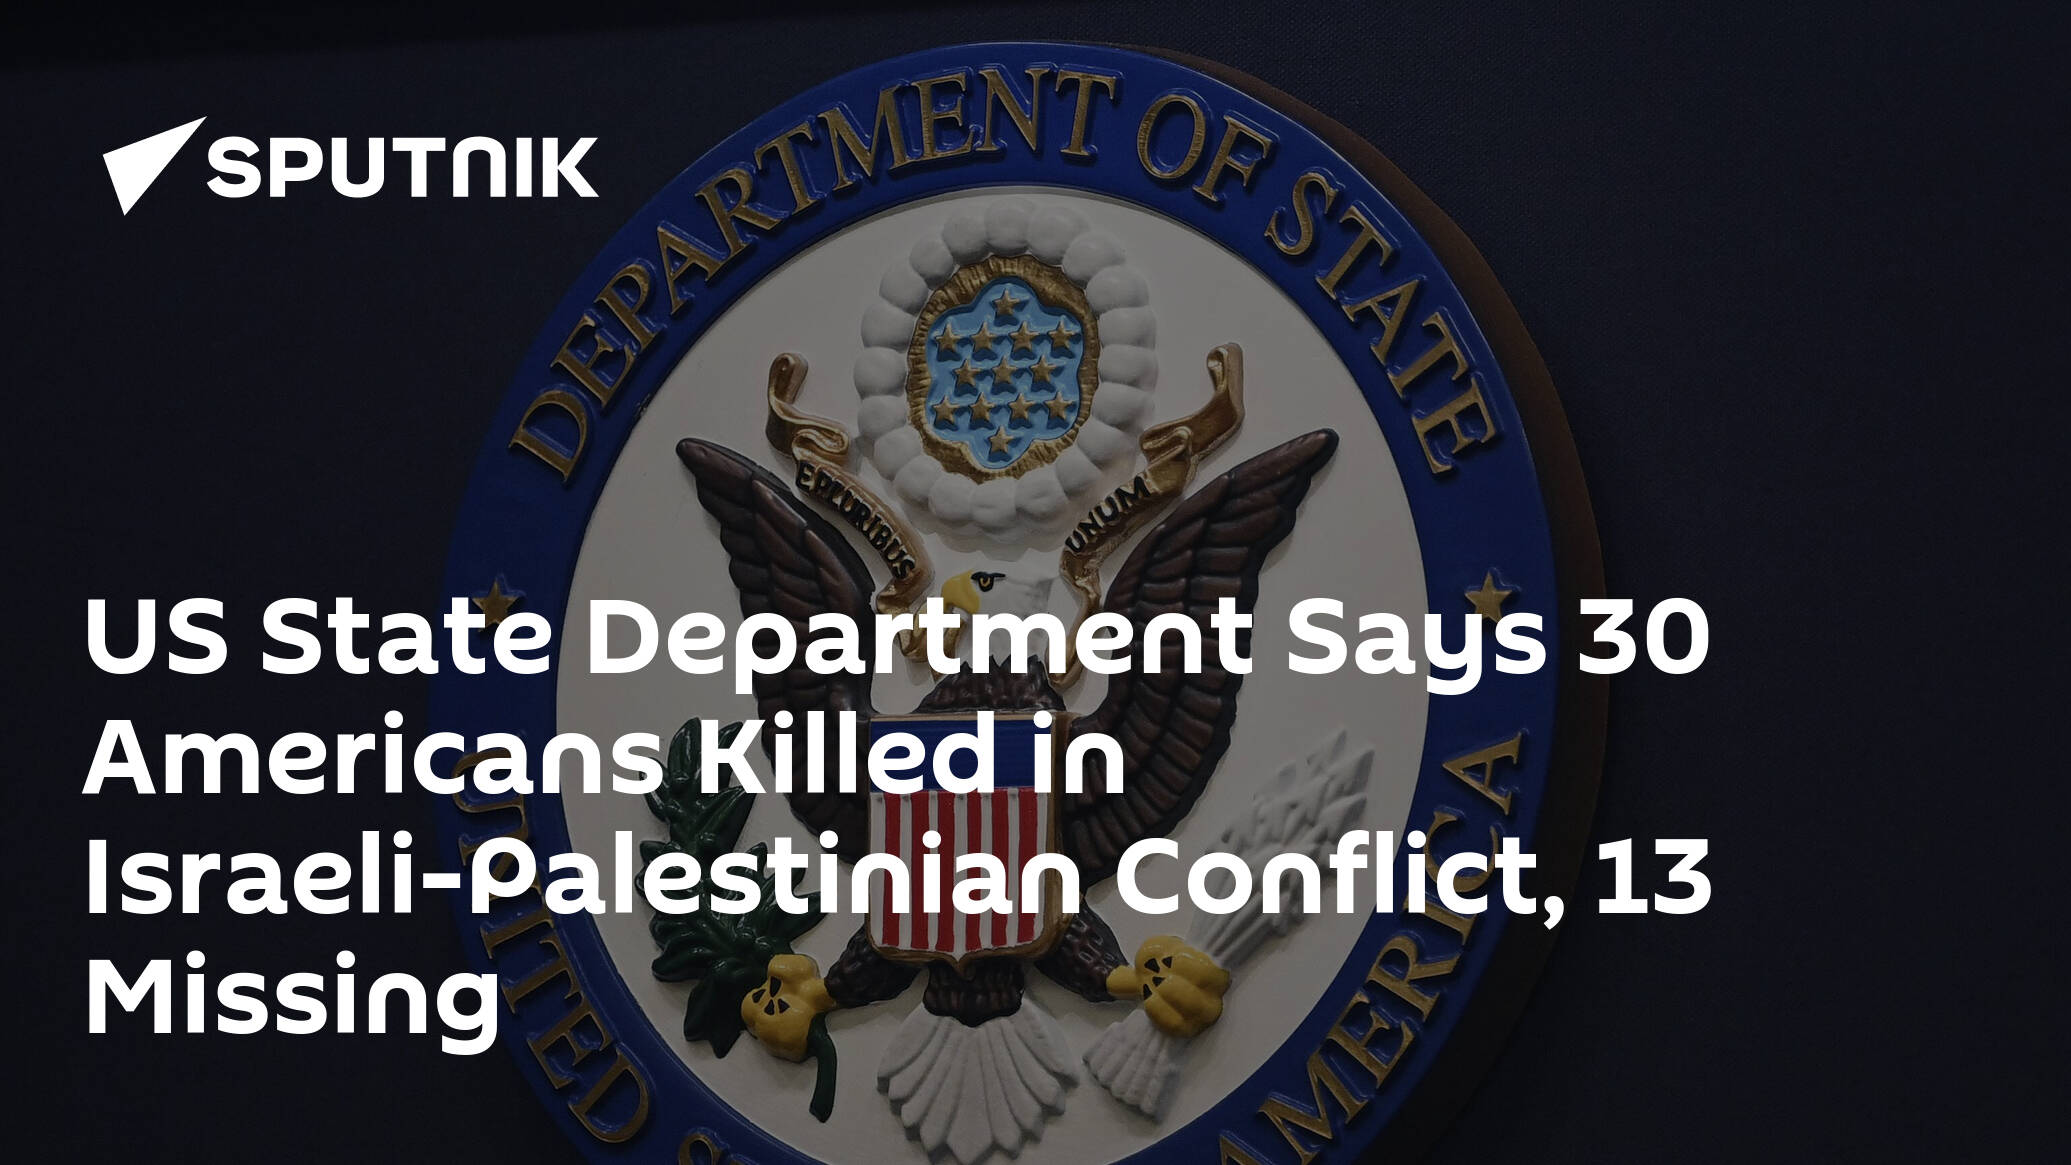 US State Department Says 30 Americans Killed in Israeli-Palestinian Conflict, 13 Missing